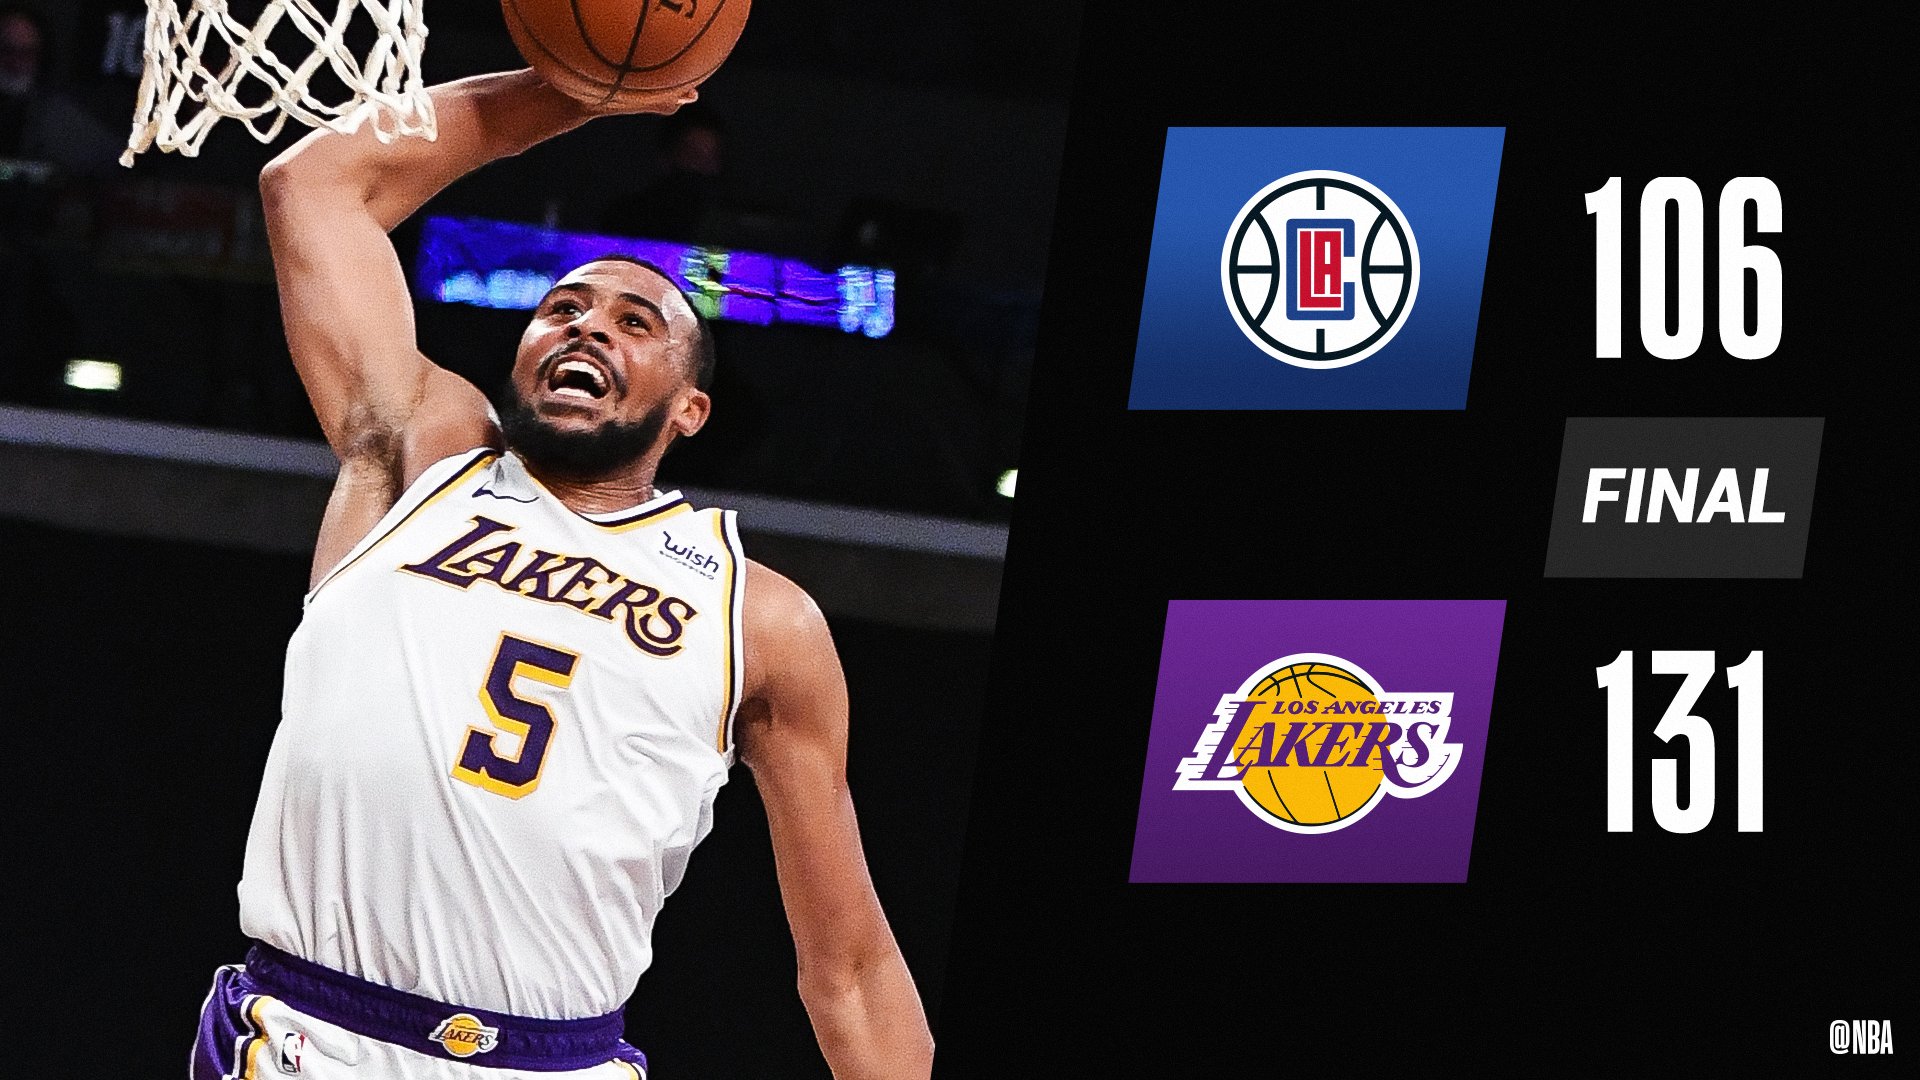 NBA : Lakers defeat Clippers 131 106 in second preseason game